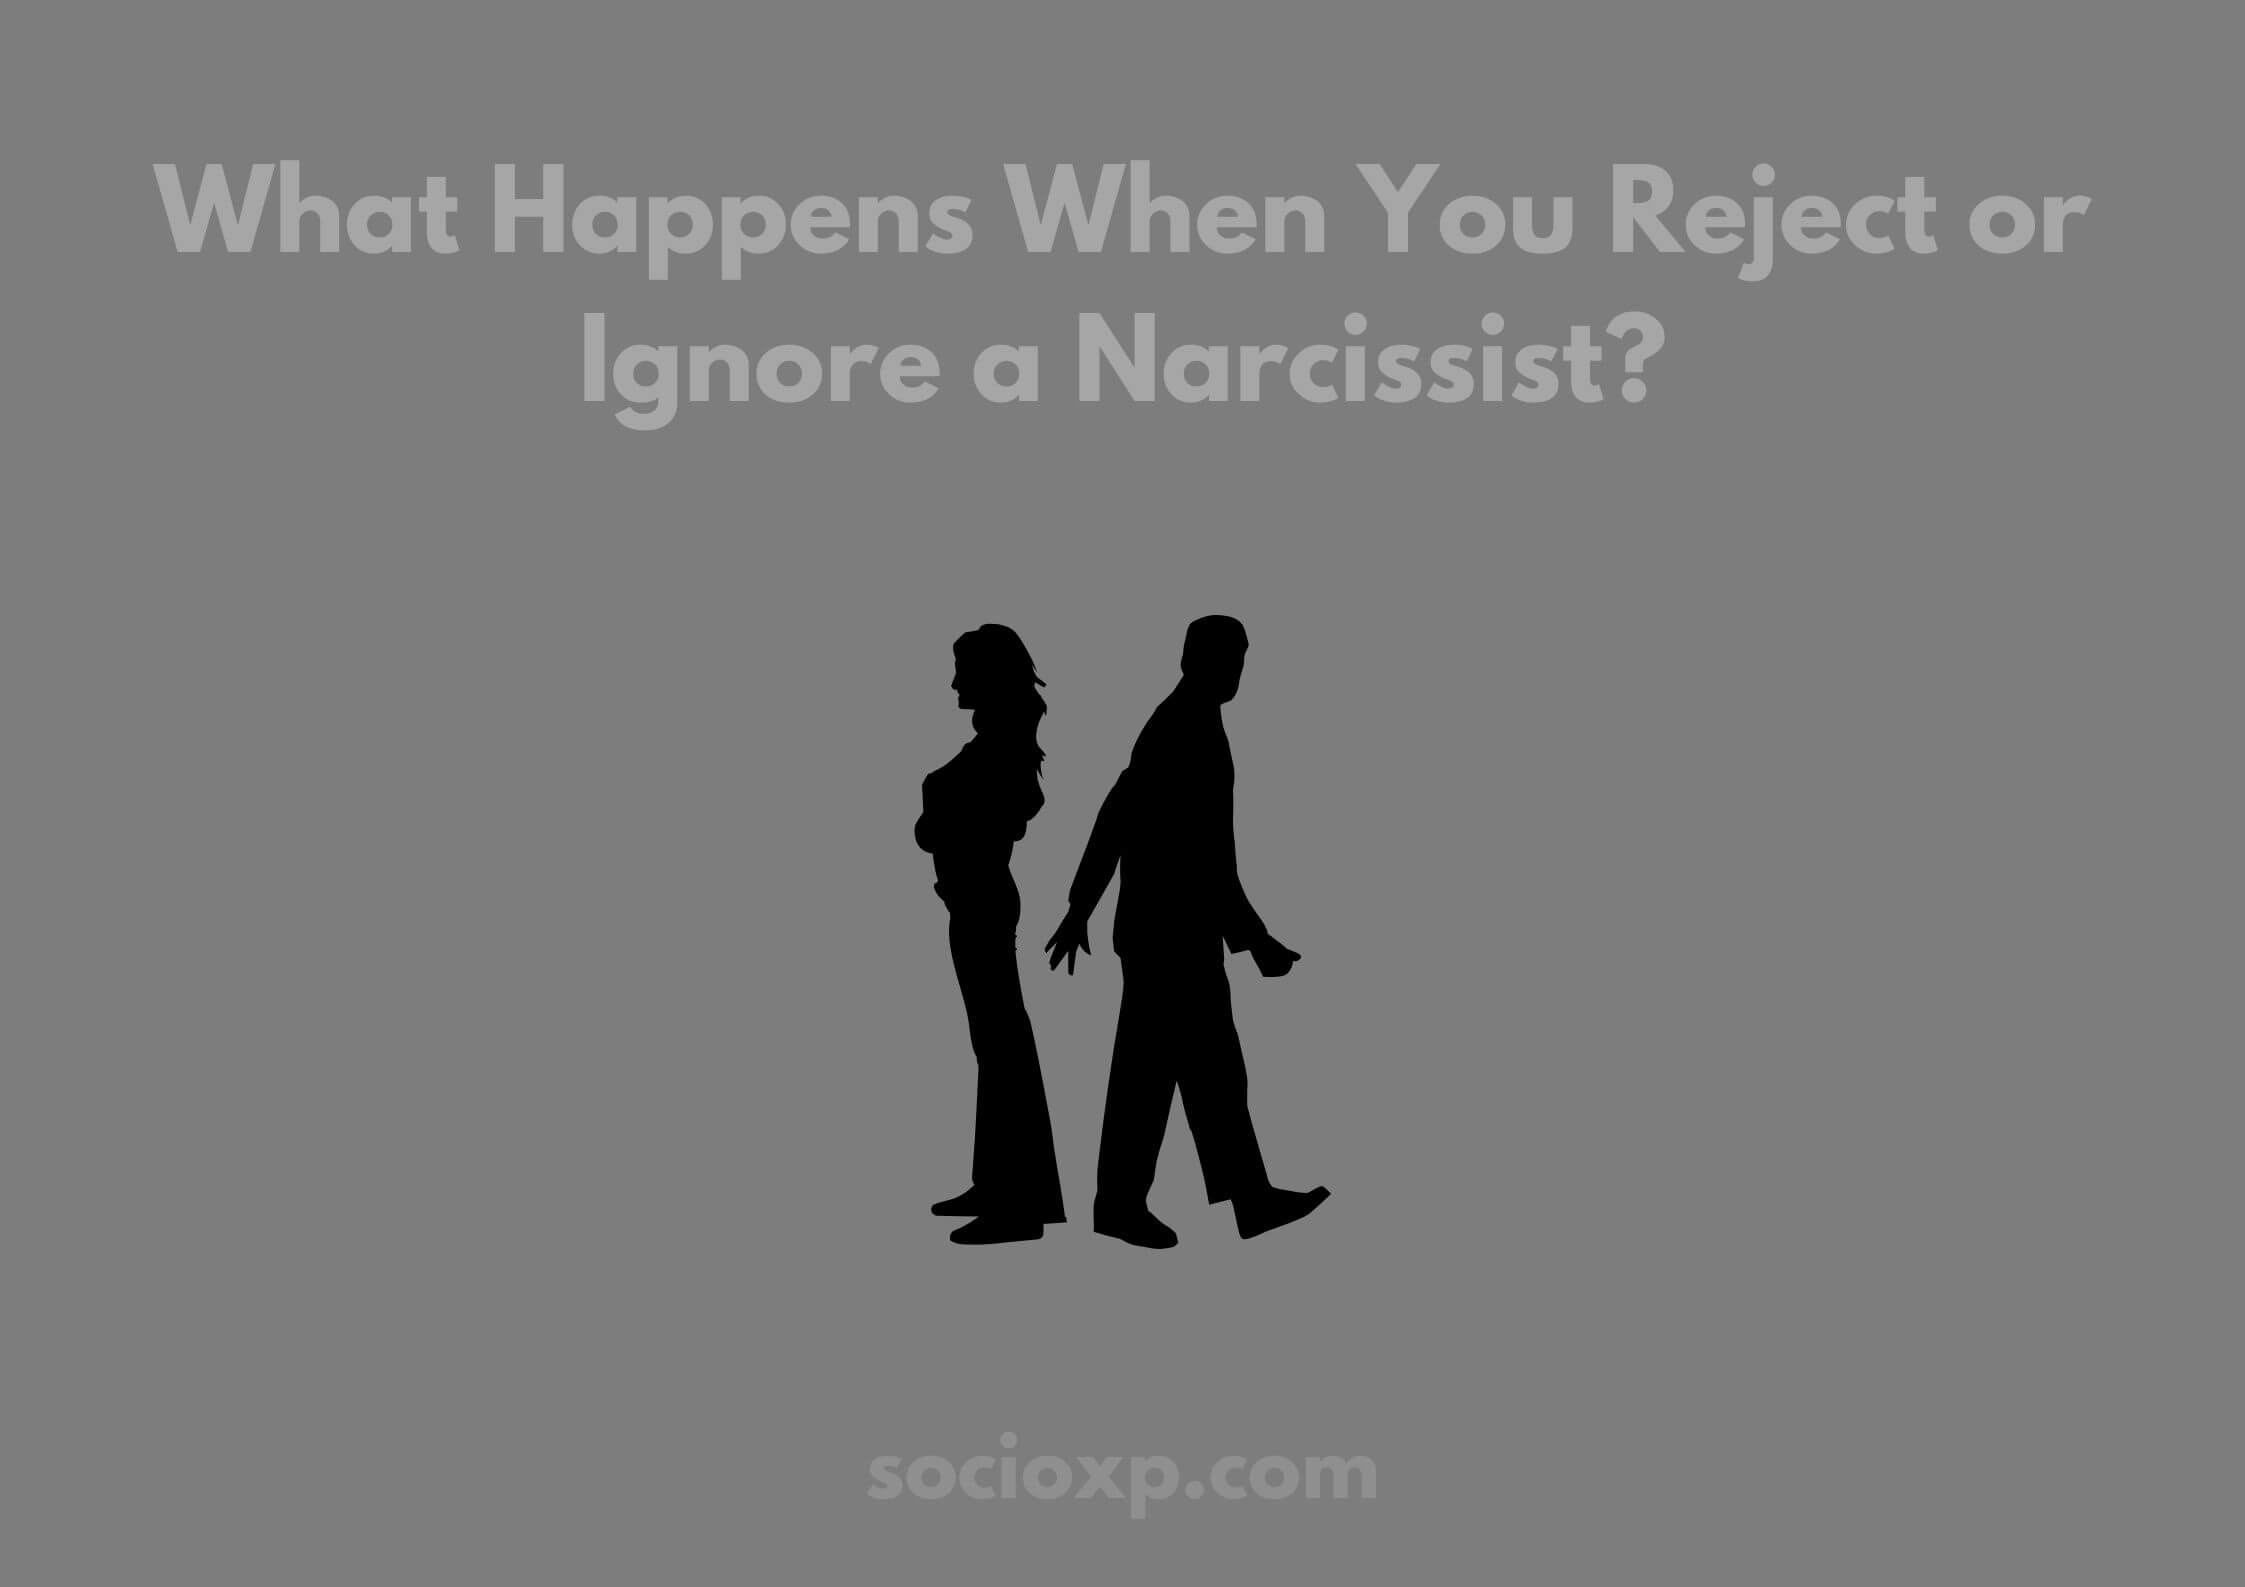 What Happens When You Reject or Ignore a Narcissist?